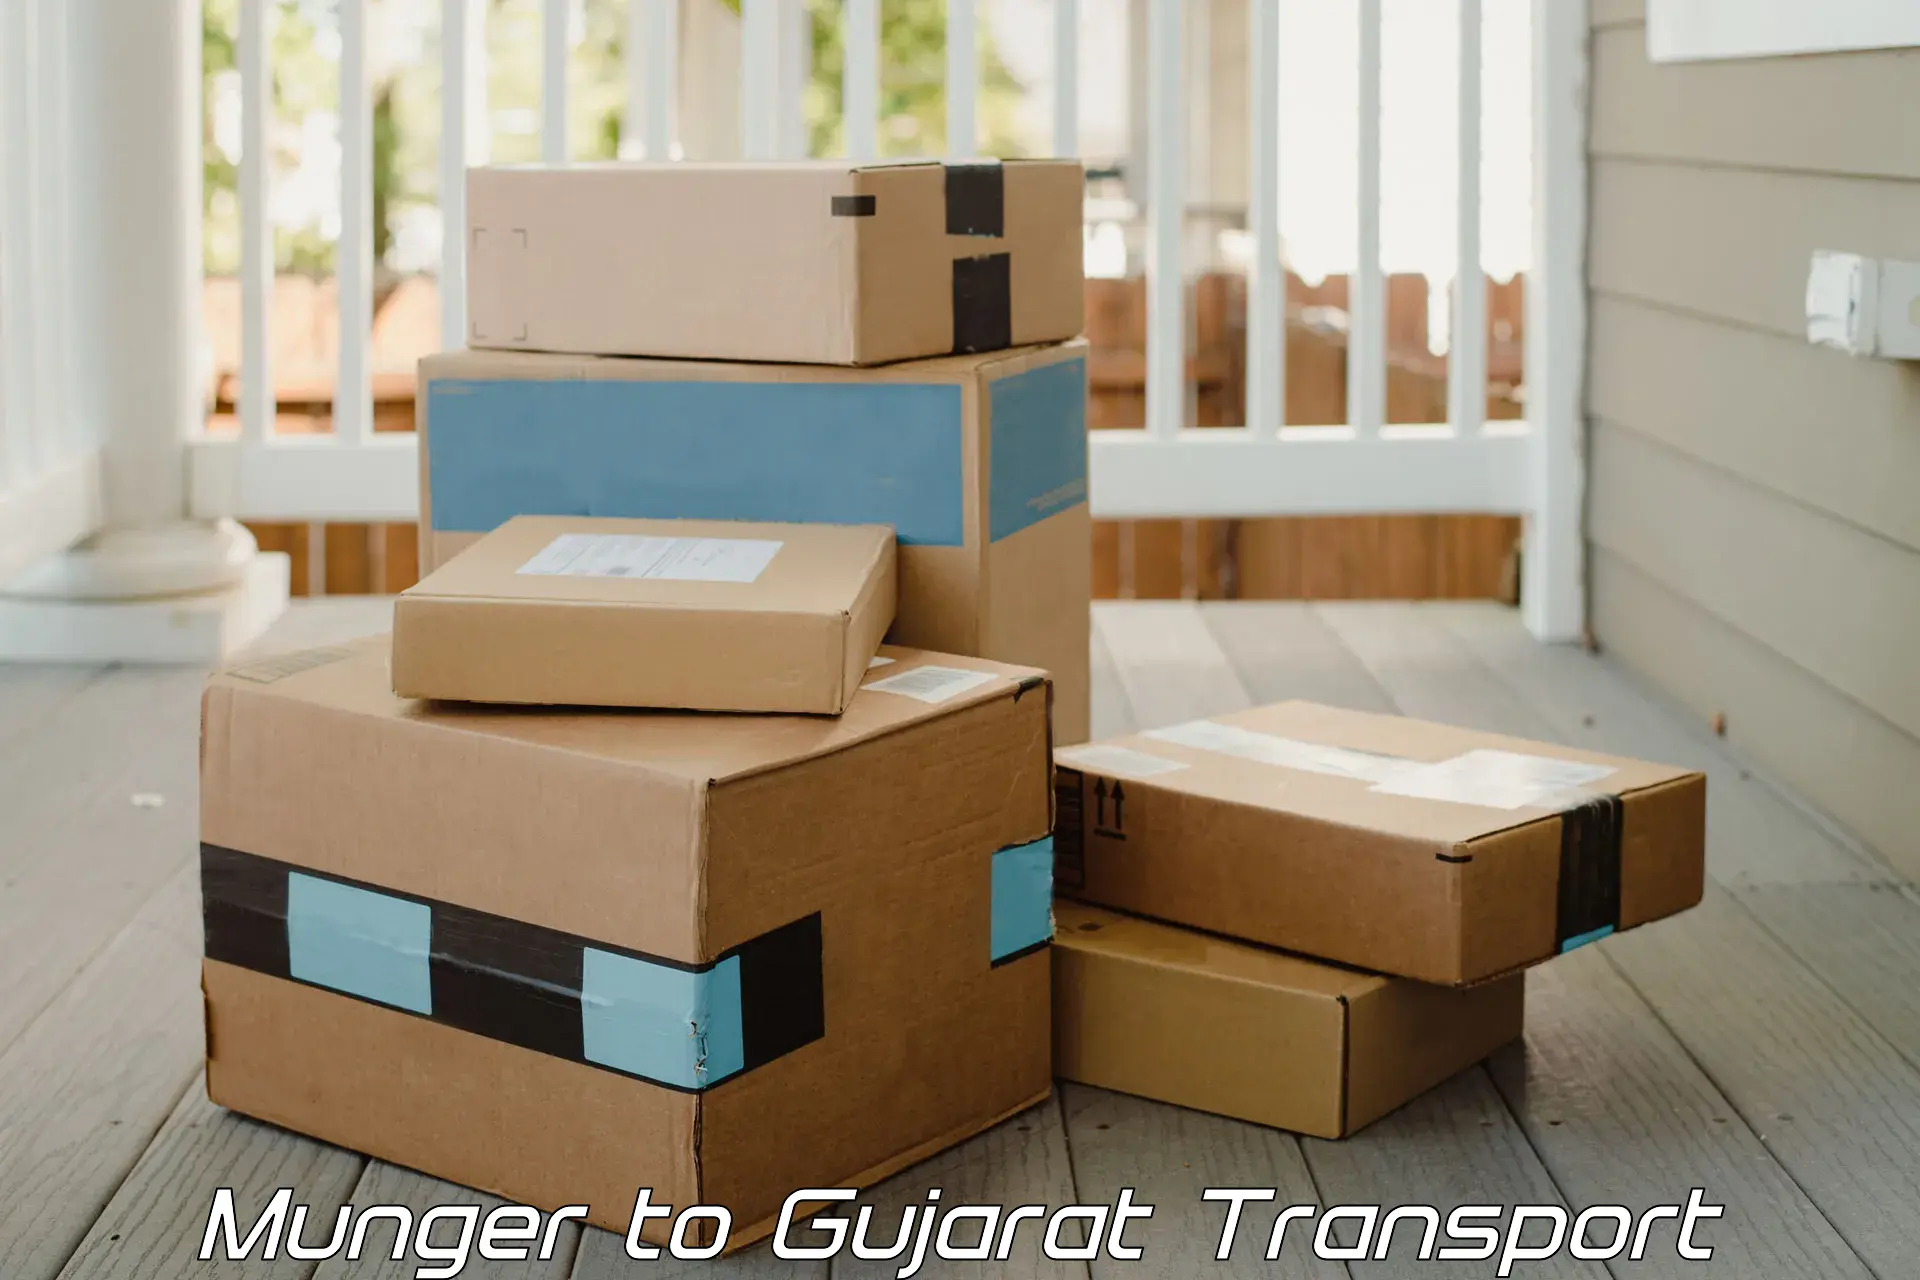 Container transport service Munger to Godhra